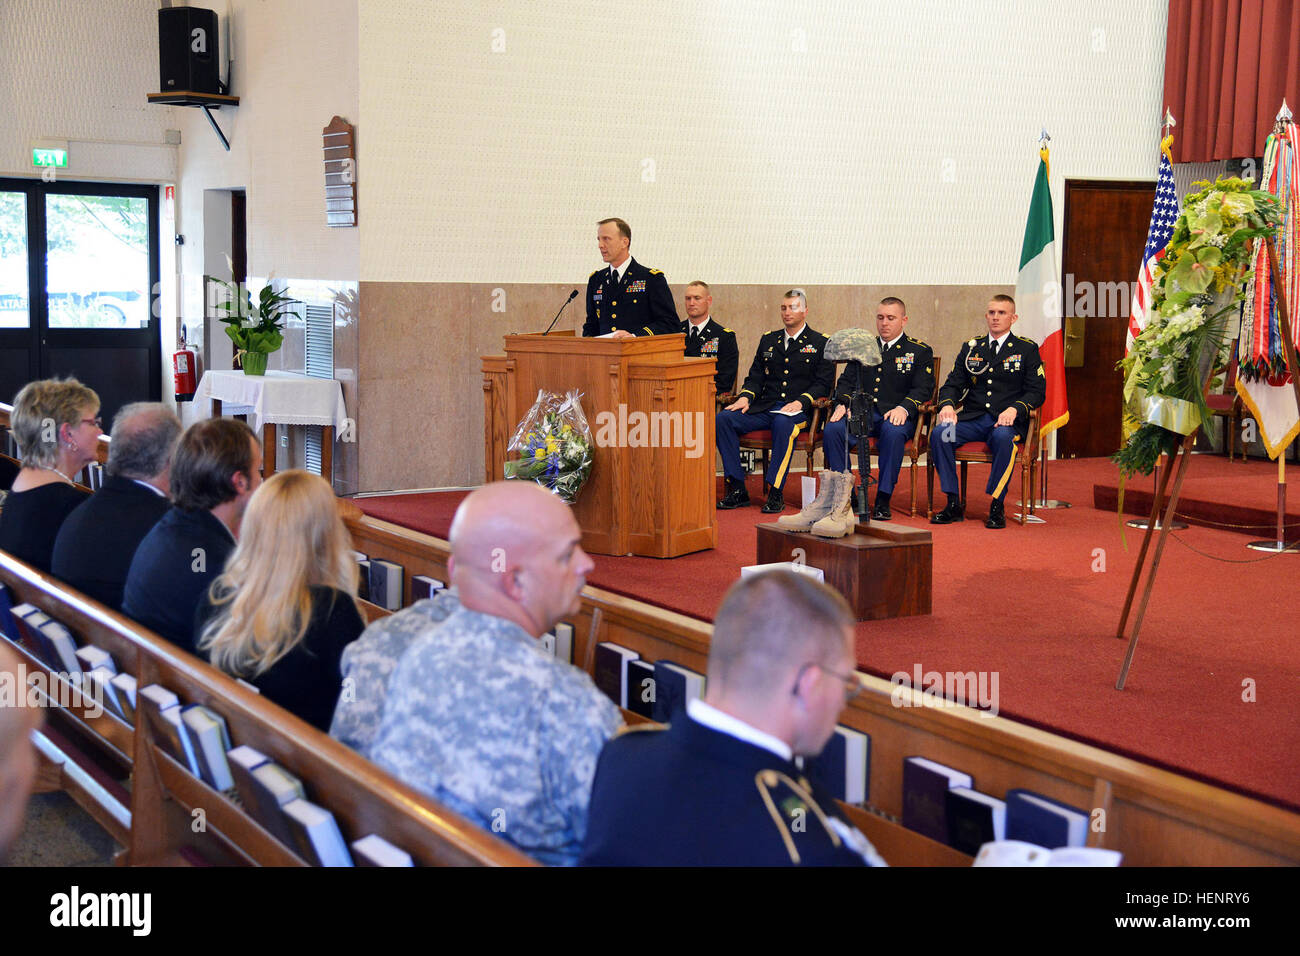 Chaplain Lt. Col. Peter Ferris gives an invocation for Soldiers and friends of the 464th Military Police Platoon during a memorial service for Spc. Harley Henry Reynolds, who died Sept. 6 from injuries sustained in a motorcycle accident, Caserma Ederle, Vicenza, Italy, Sept. 12, 2014. (U.S. Army photo by Visual Information Spc. Paolo Bovo) Memorial ceremony for Spc. Harley Henry Reynolds 140912-A-JM436-076 Stock Photo